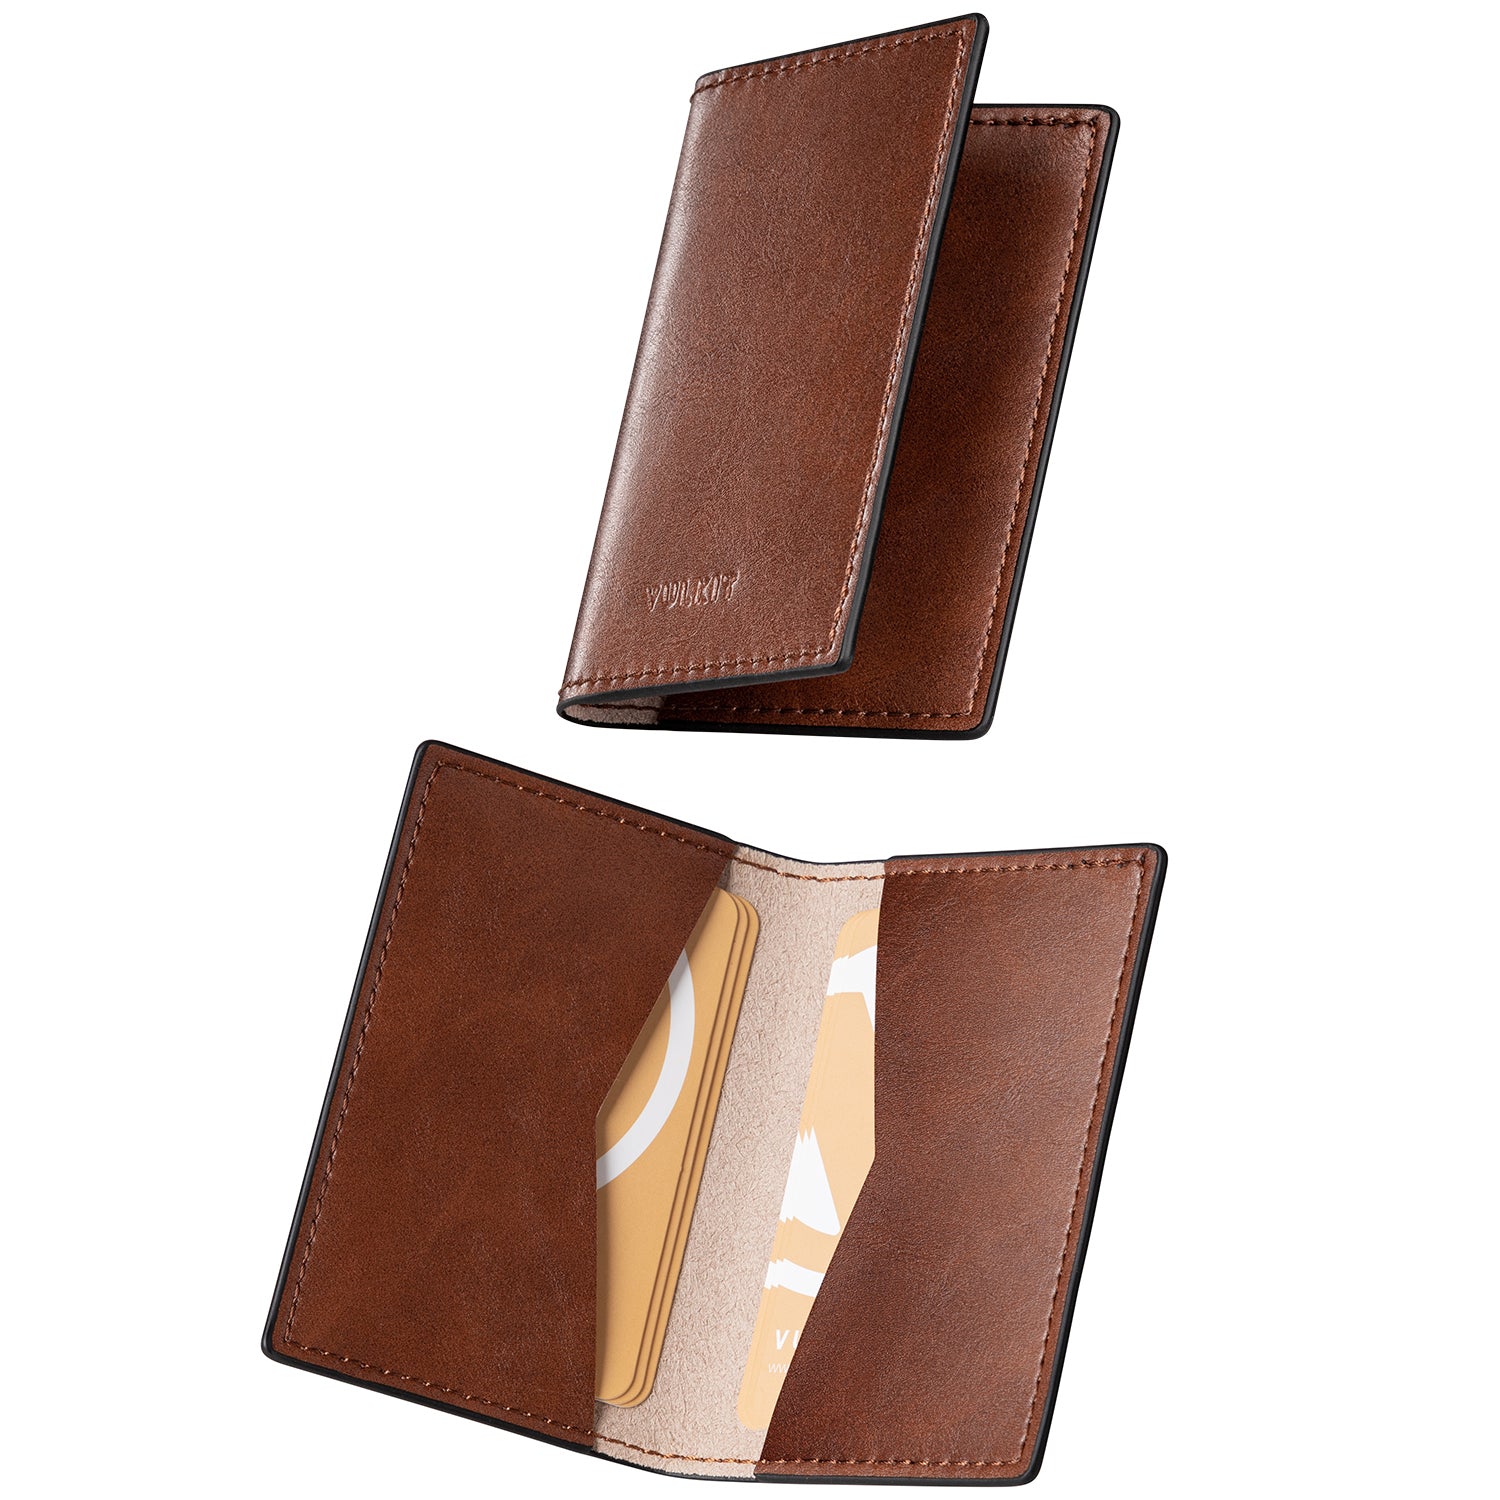 VBC100- 2 Sided Slim Business Card Holder, Up to Hold 20 Cards